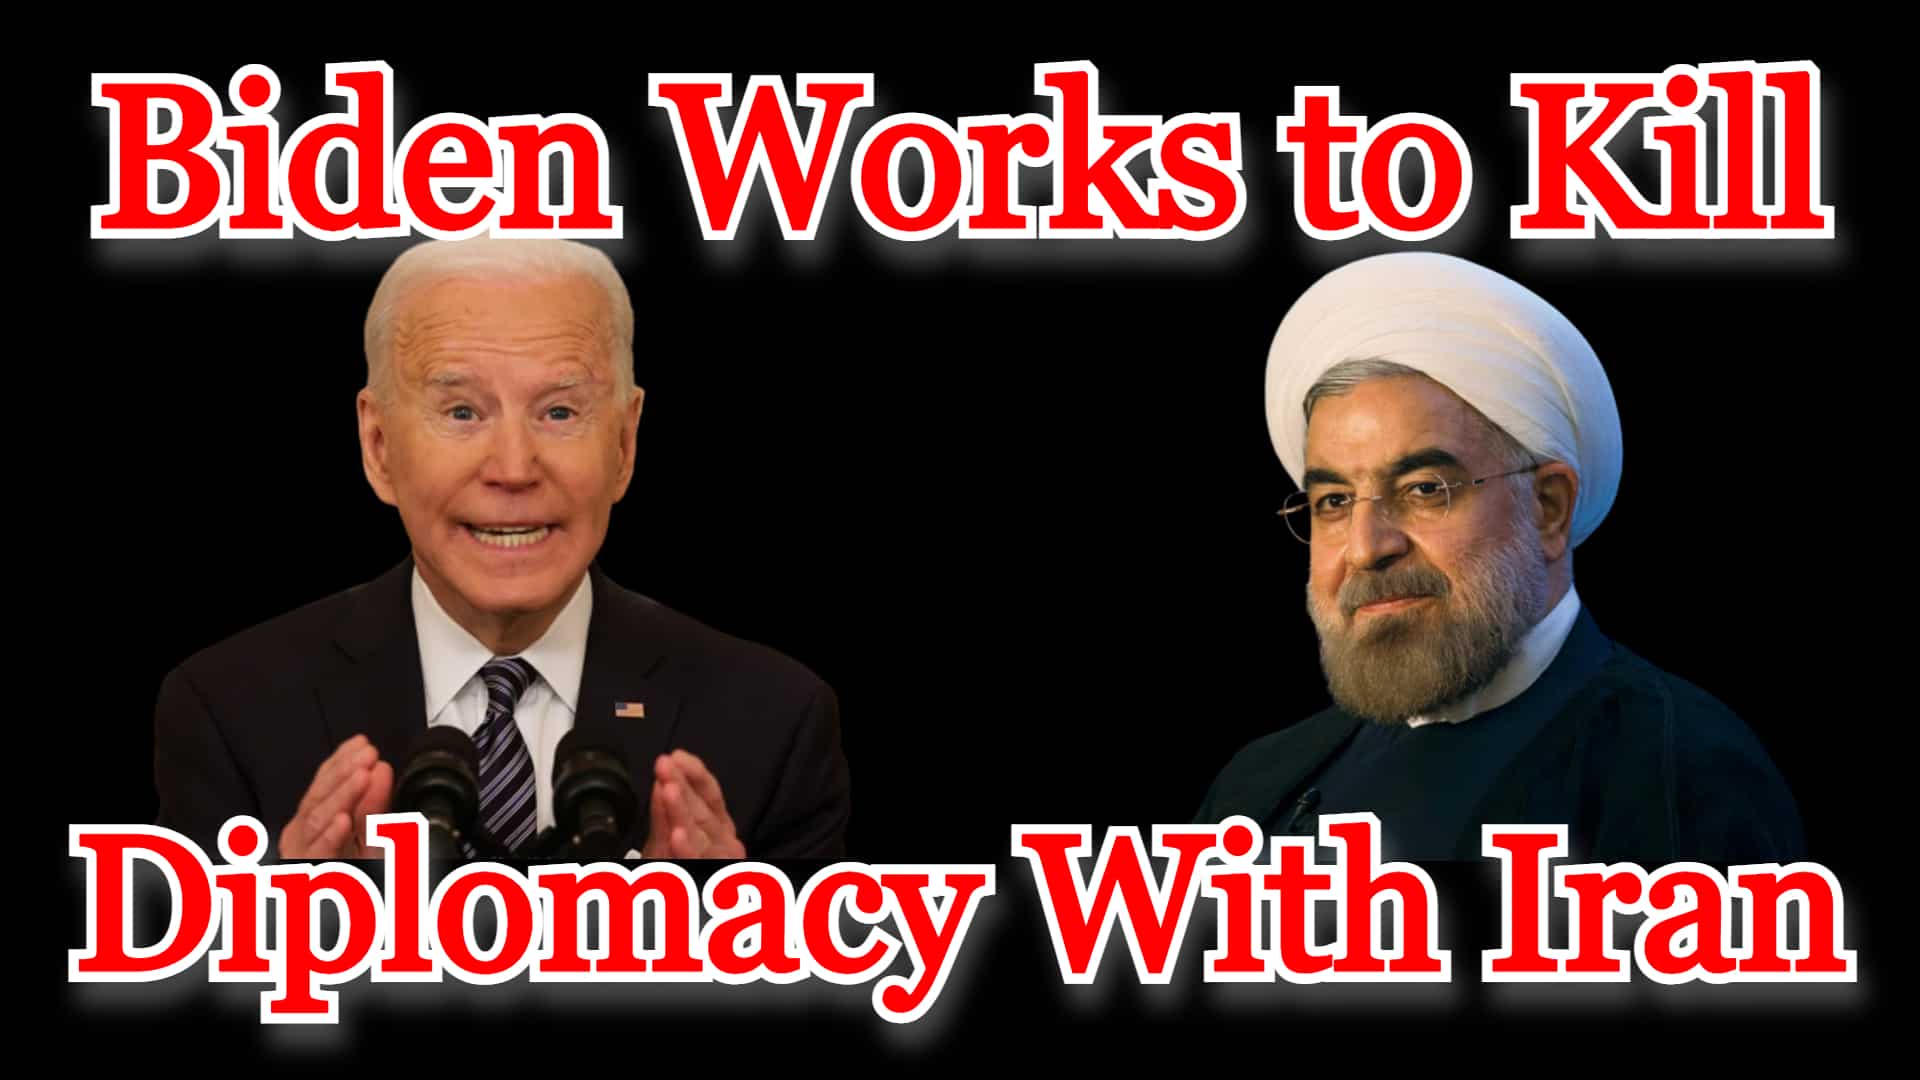 COI #183: Biden Admin Works to Prevent Diplomacy with Iran